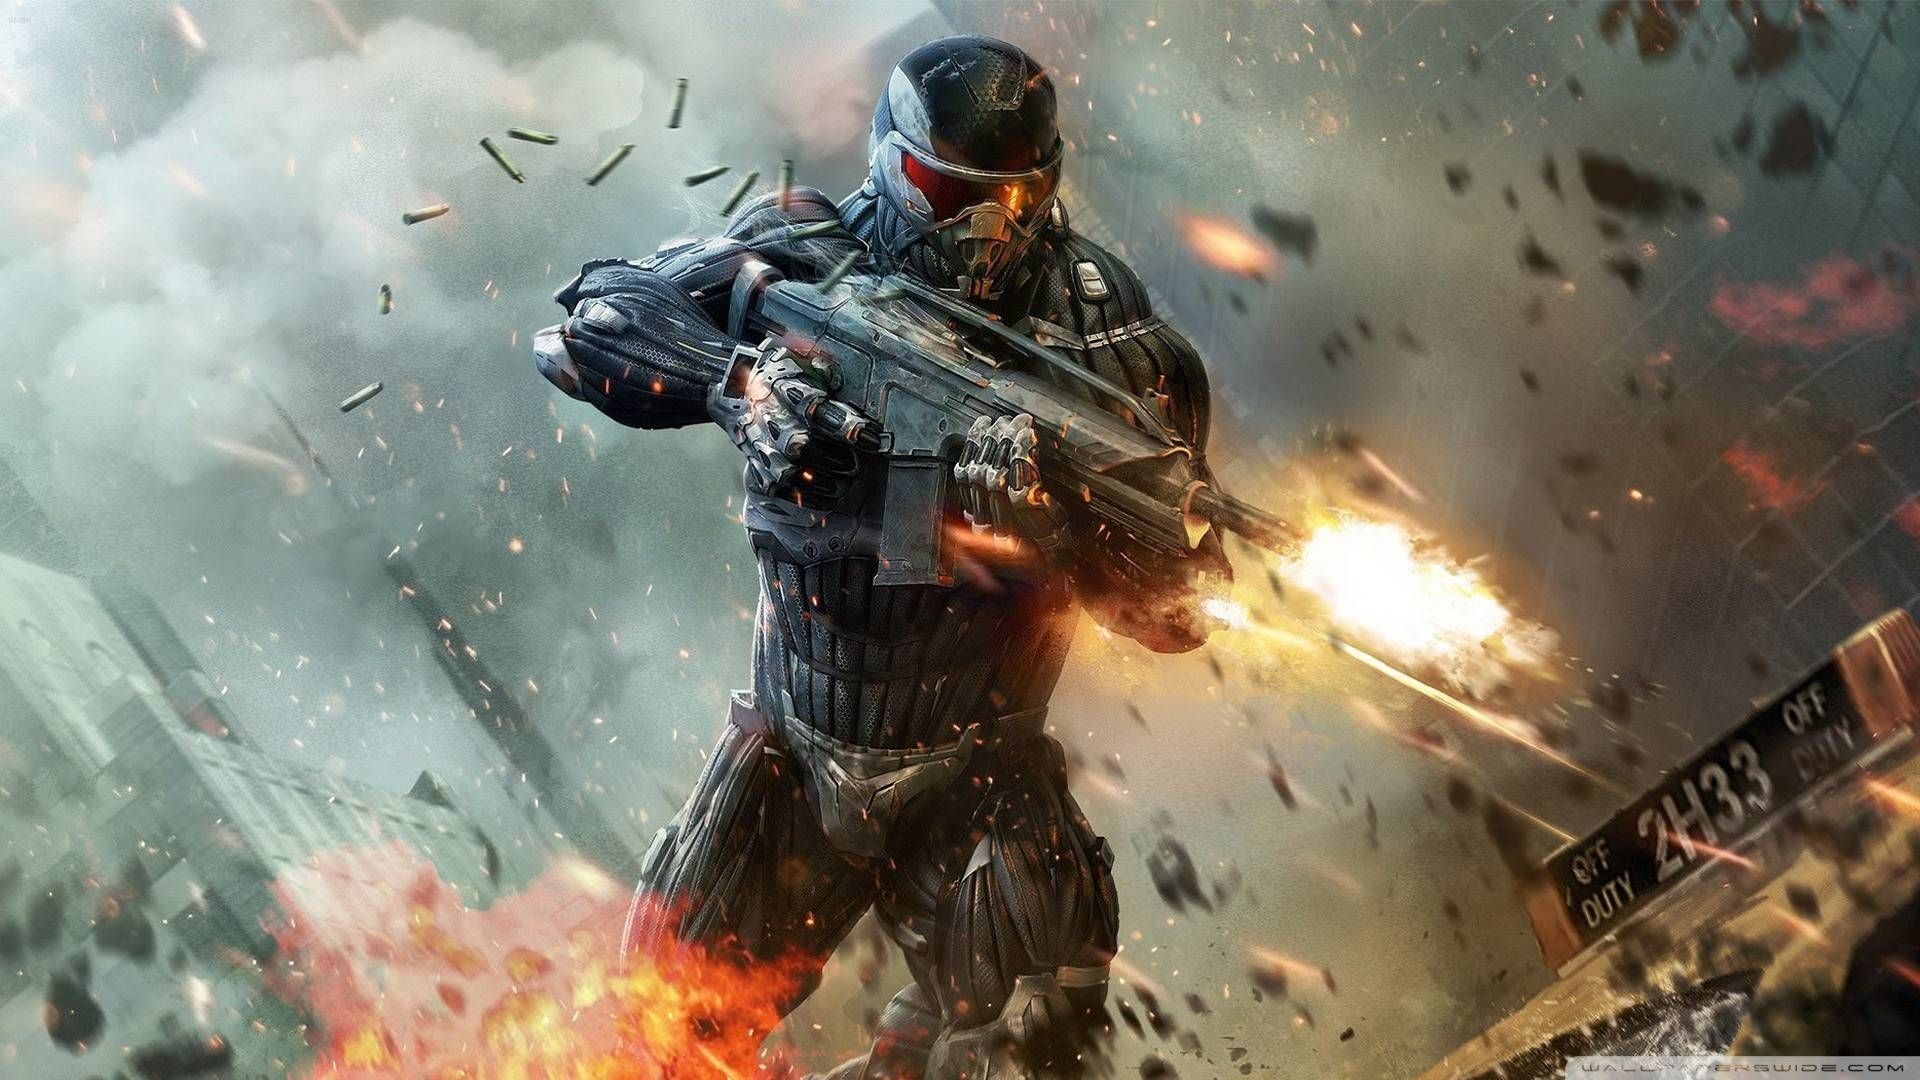 1920x1080 HD Wallpapers Widescreen 1080P 3D | View Full Size | More crysis 2 wallpaper  full hd 1080p pc 1